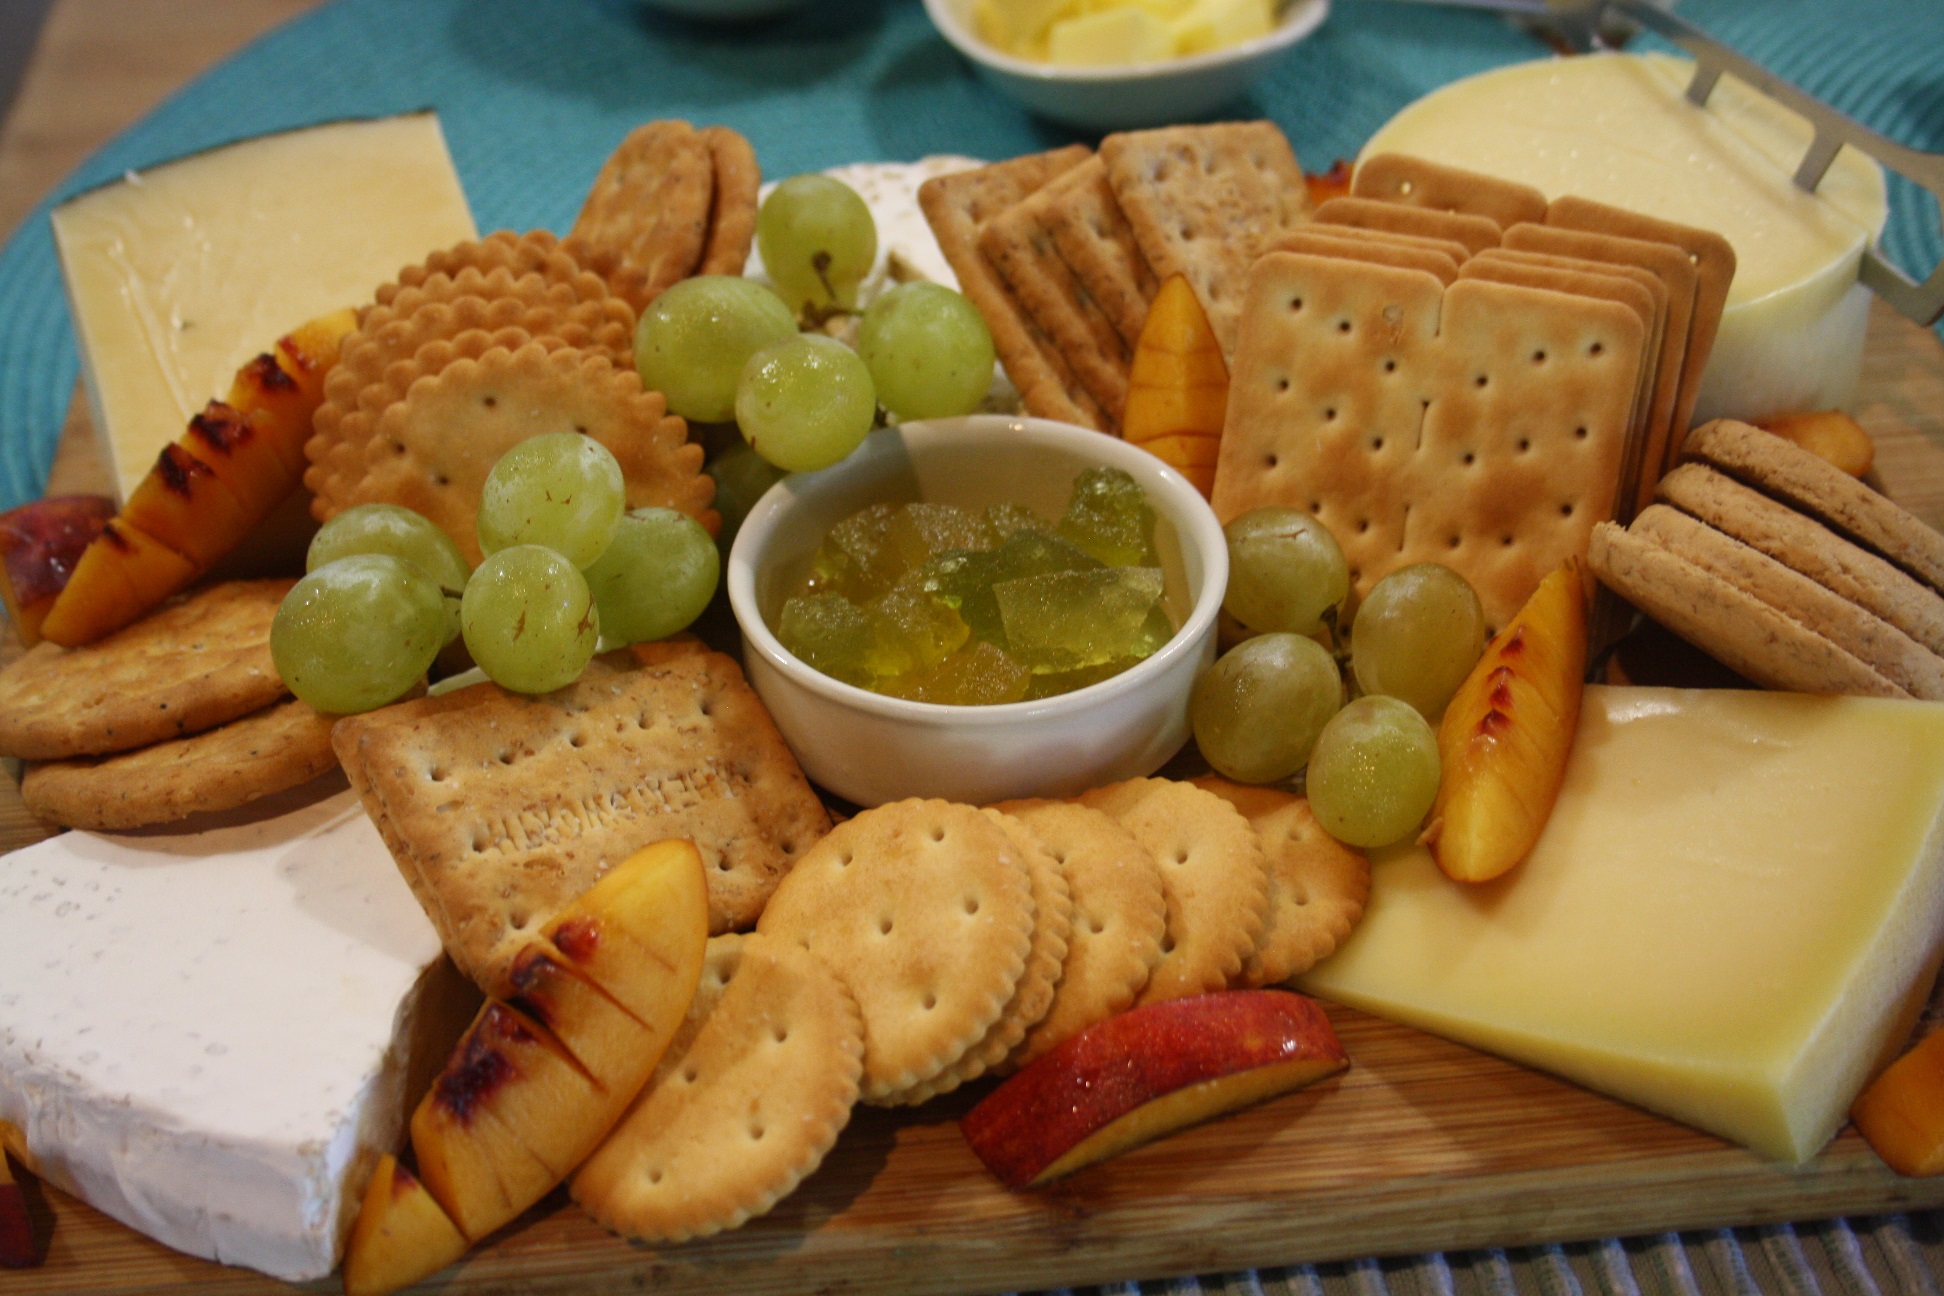 Delicious local cheeses and preserves